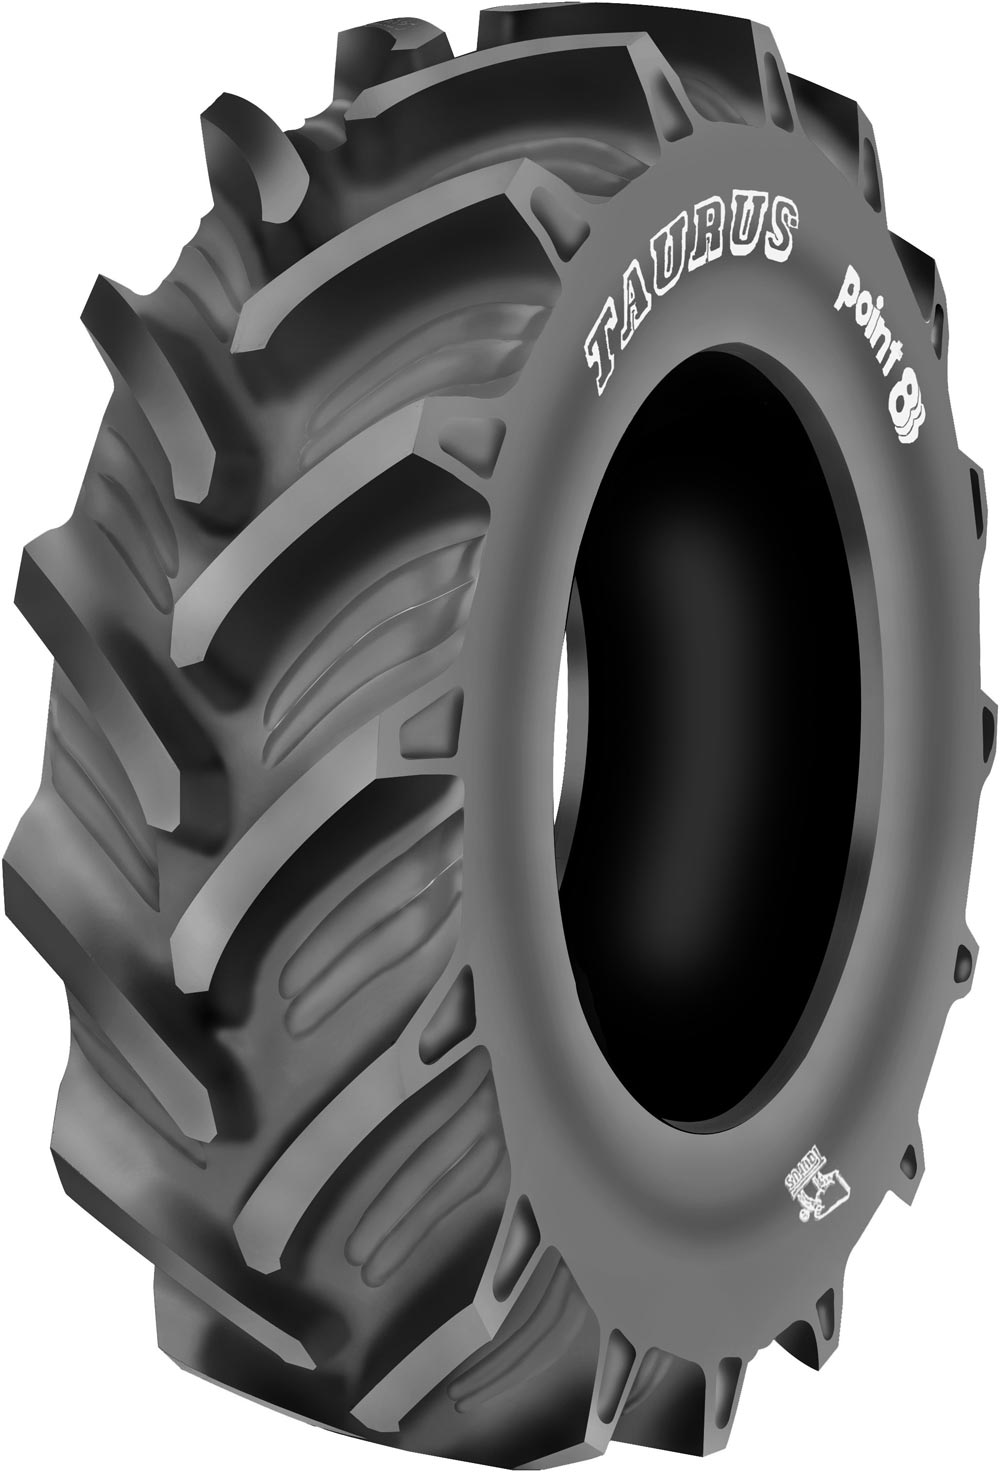 product_type-industrial_tires TAURUS POINT 8 18.4 R30 460R